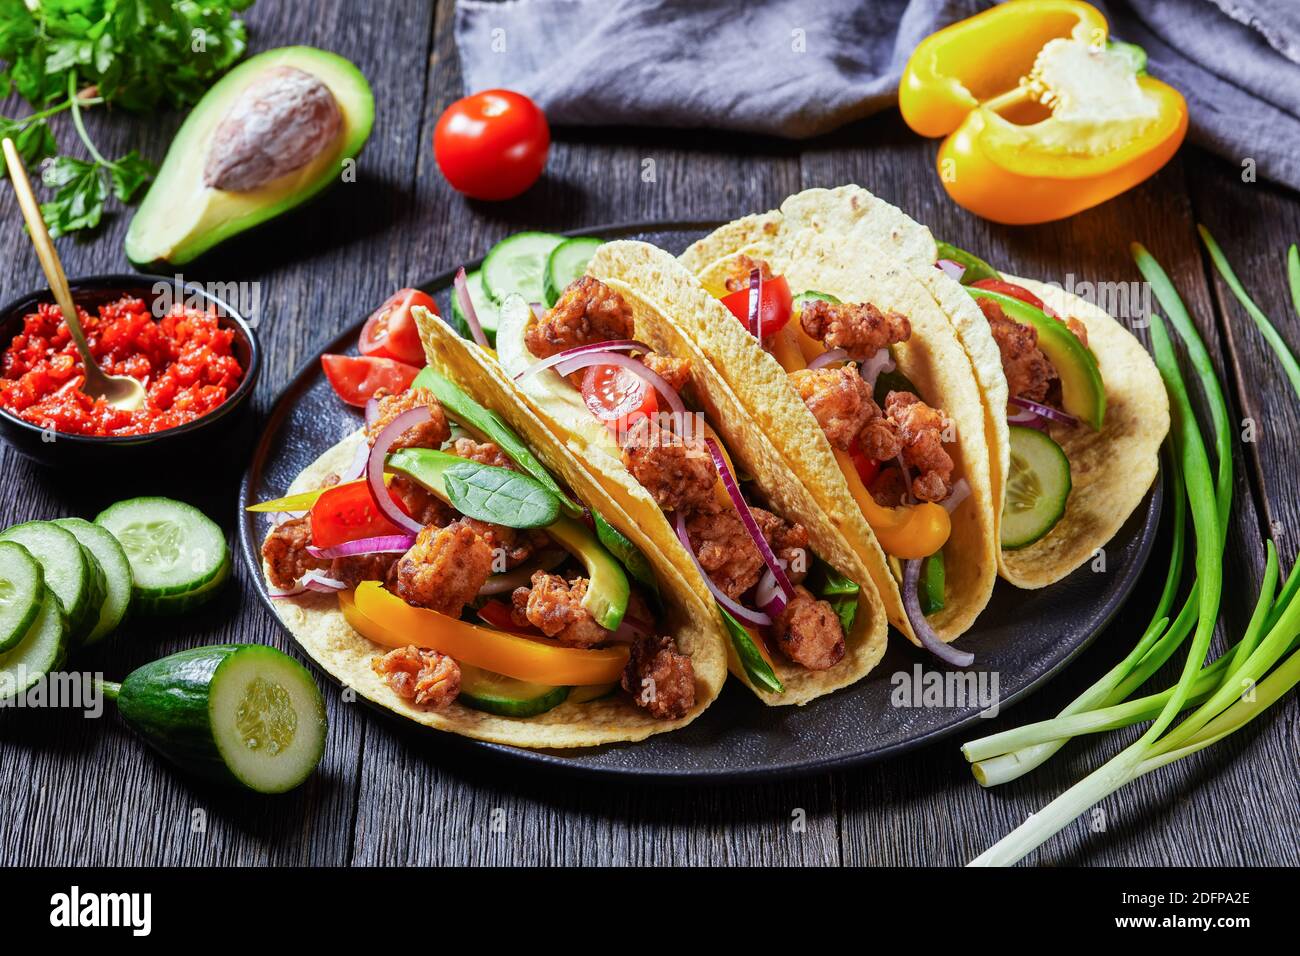 chicken street corn tacos with veggies and salsa Stock Photo